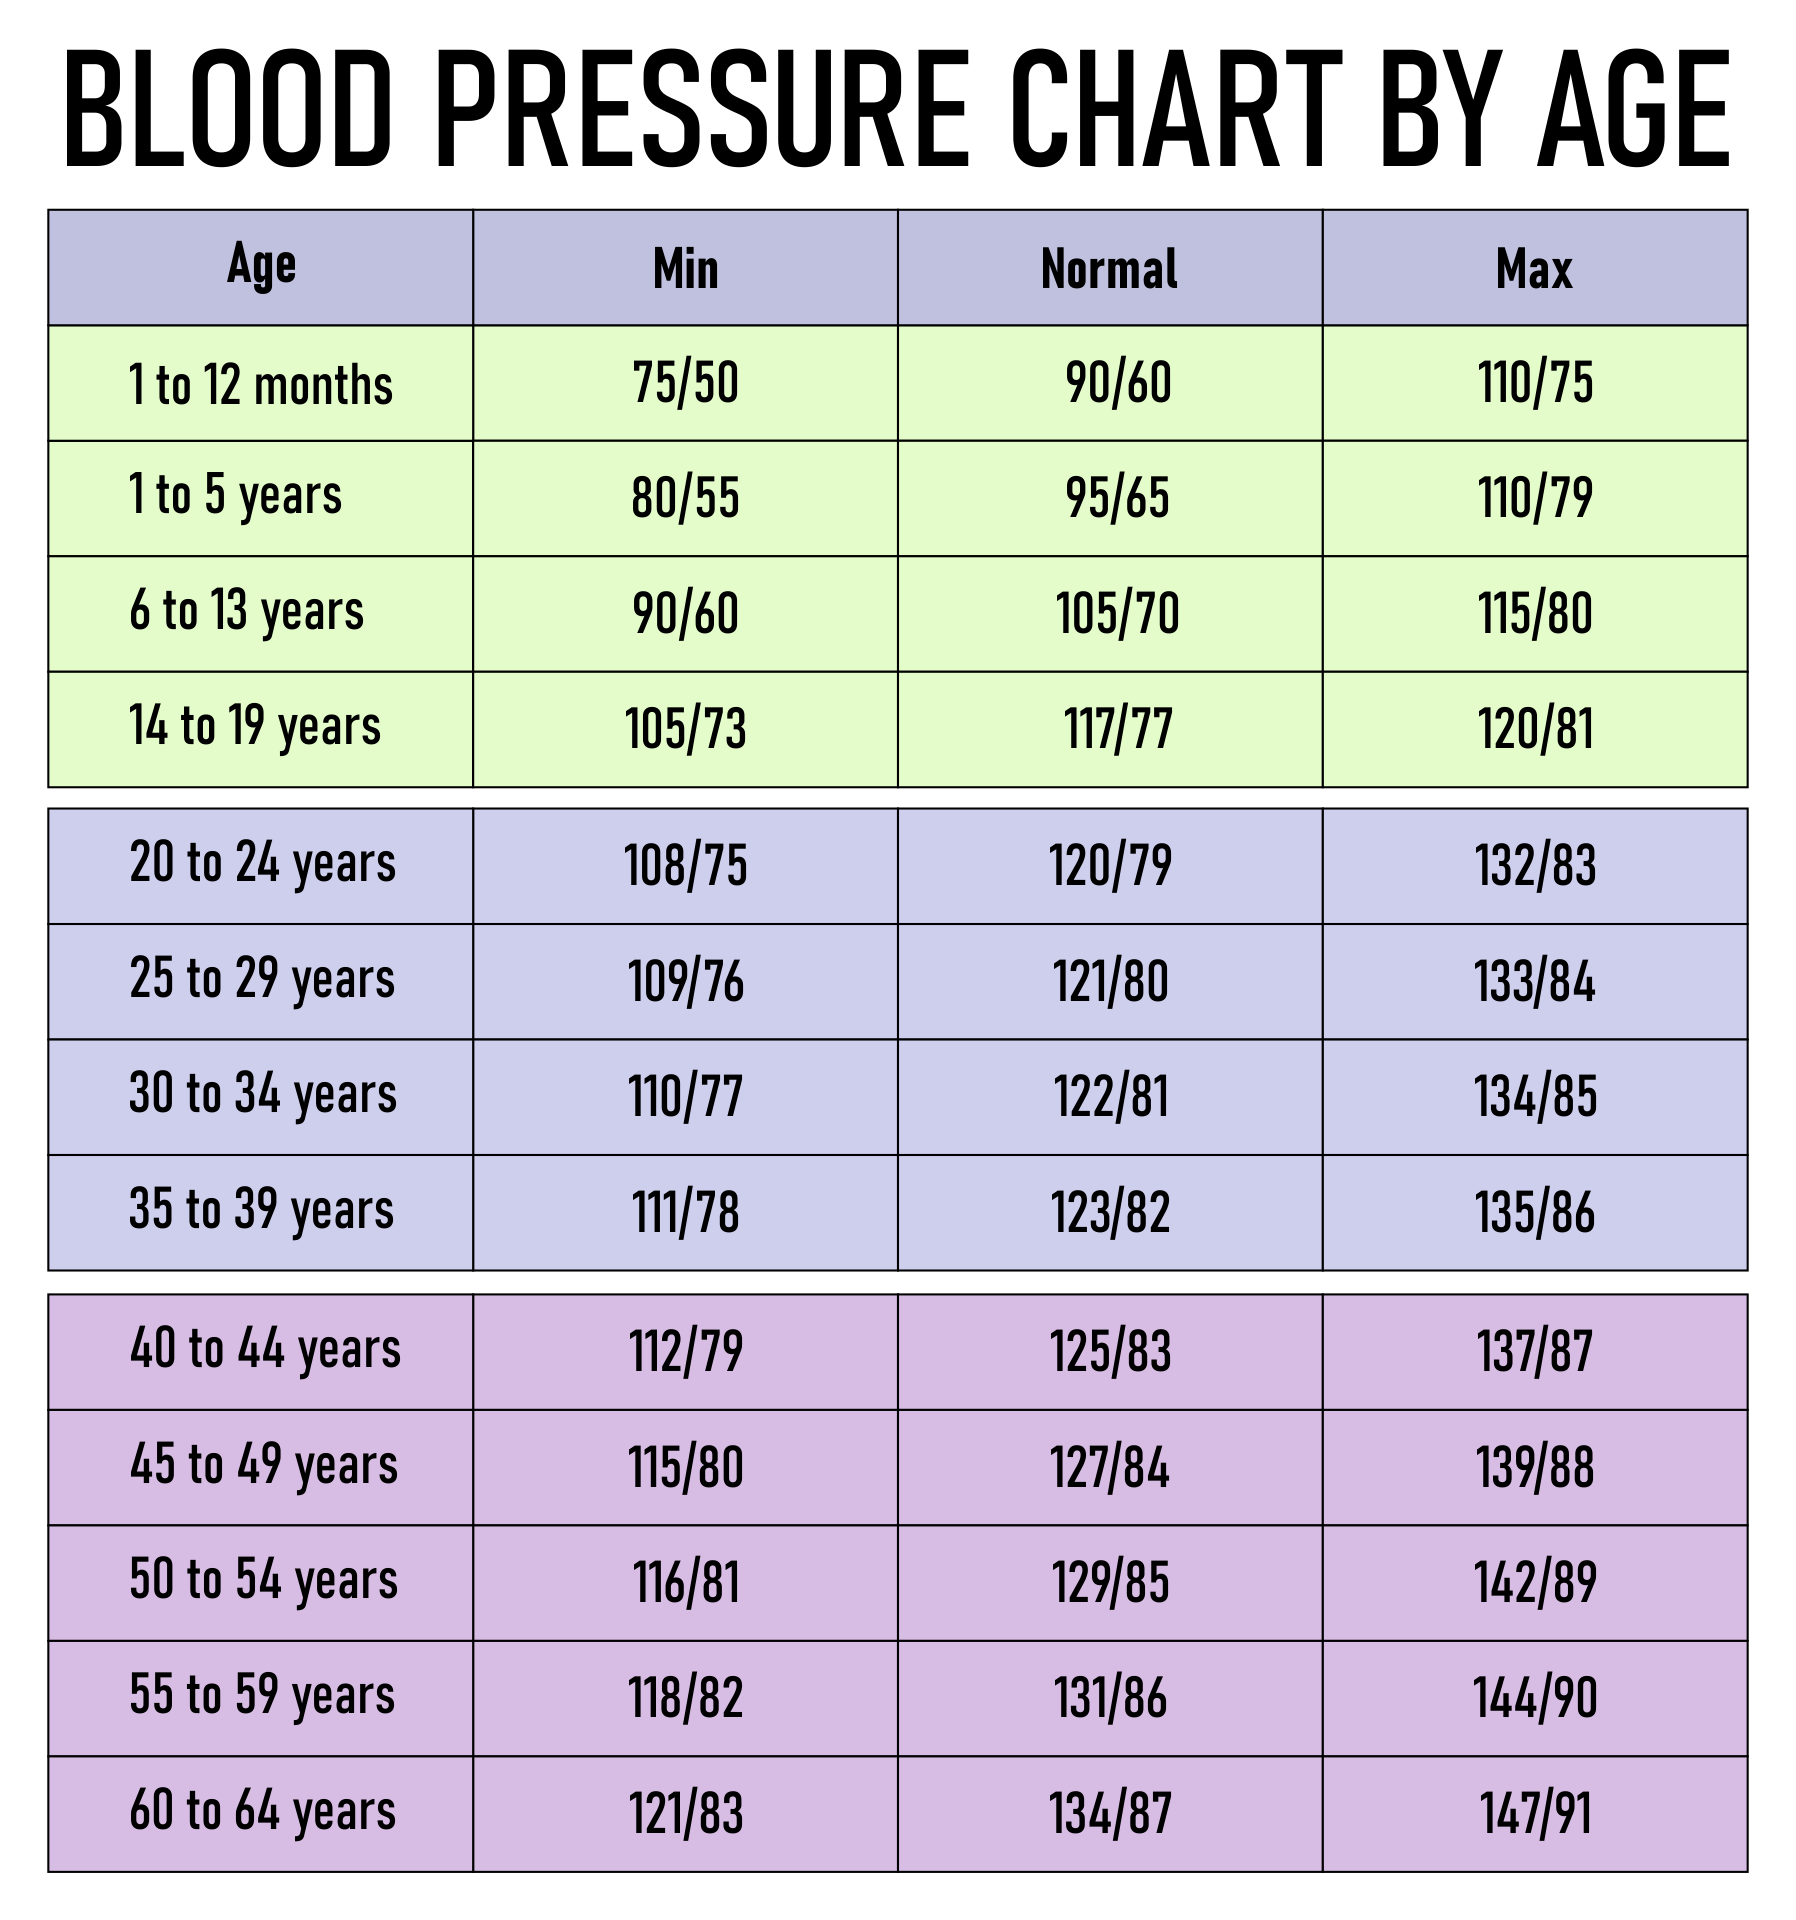 Printable Blood Pressure Chart By Age_15695